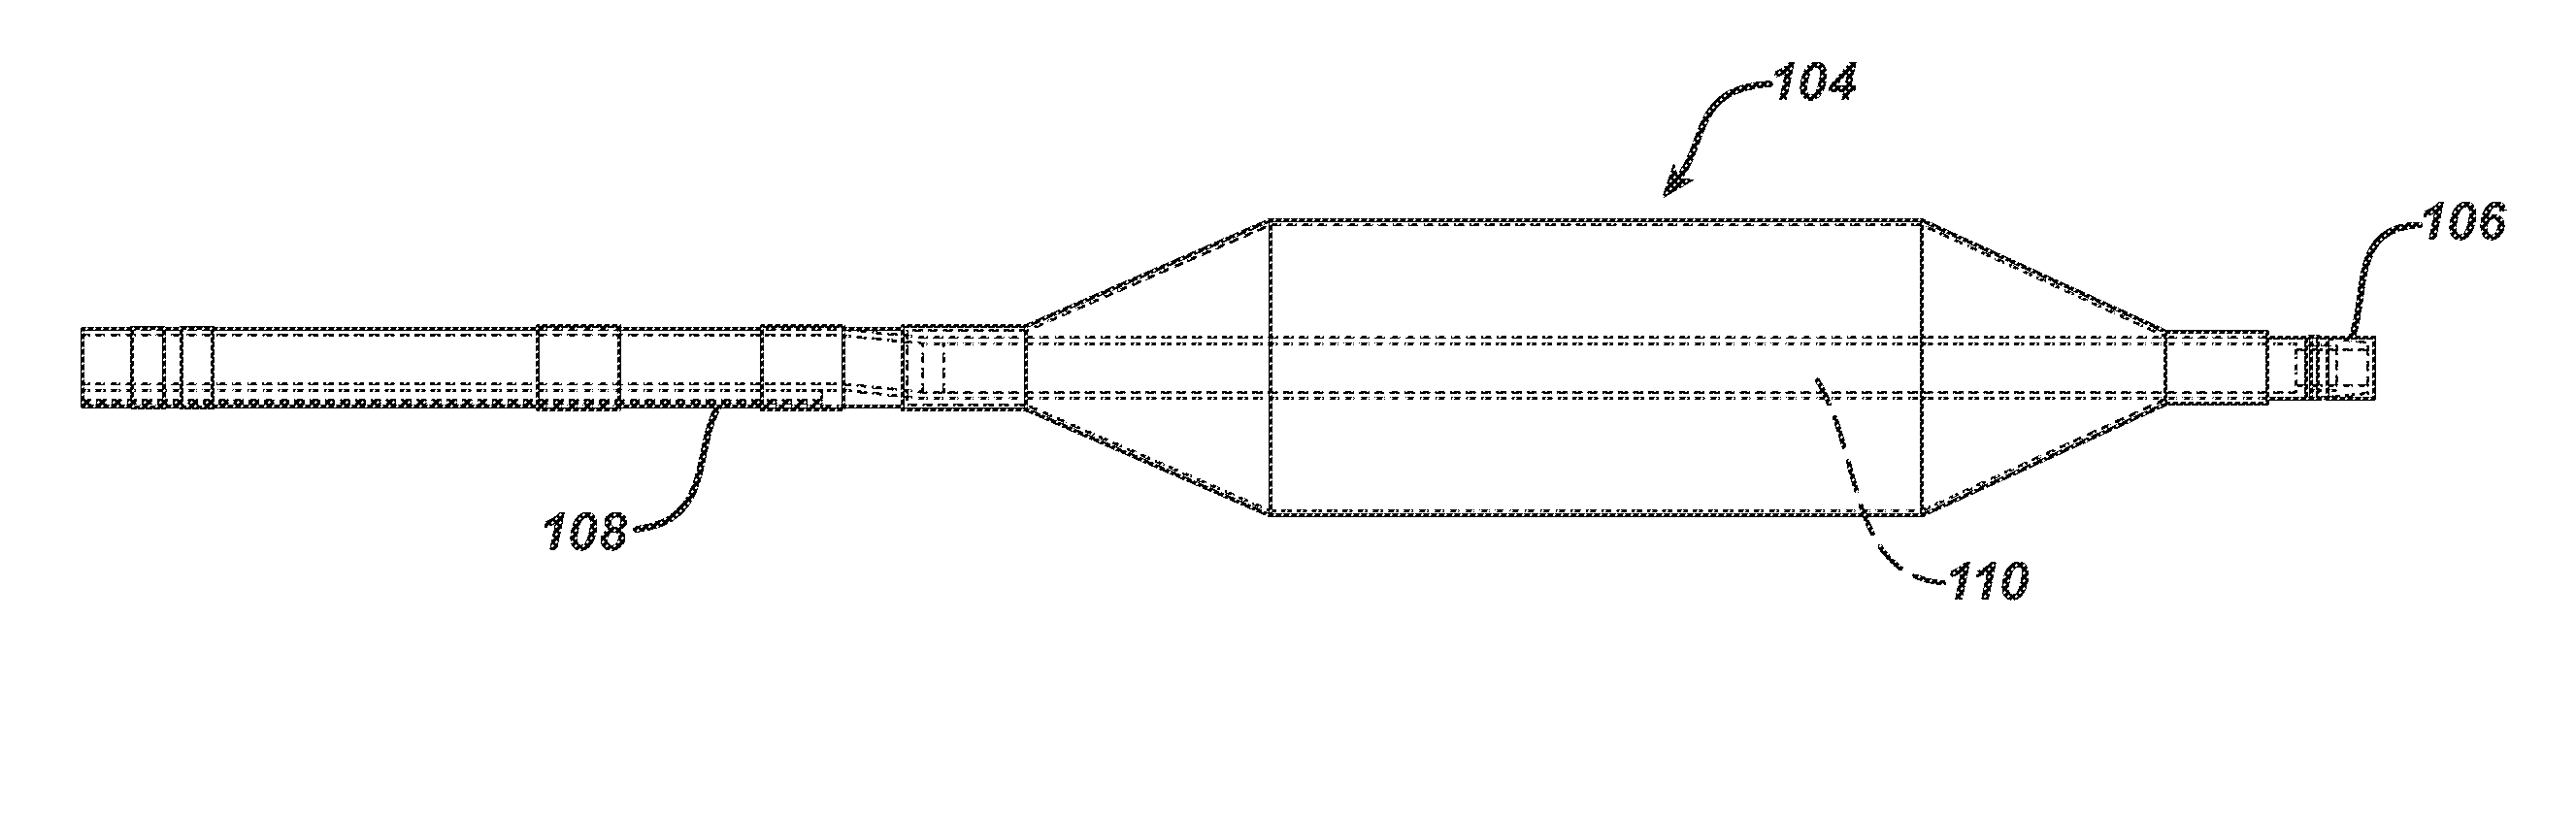 Balloon Dilation Catheter System for Treatment and Irrigation of the Sinuses